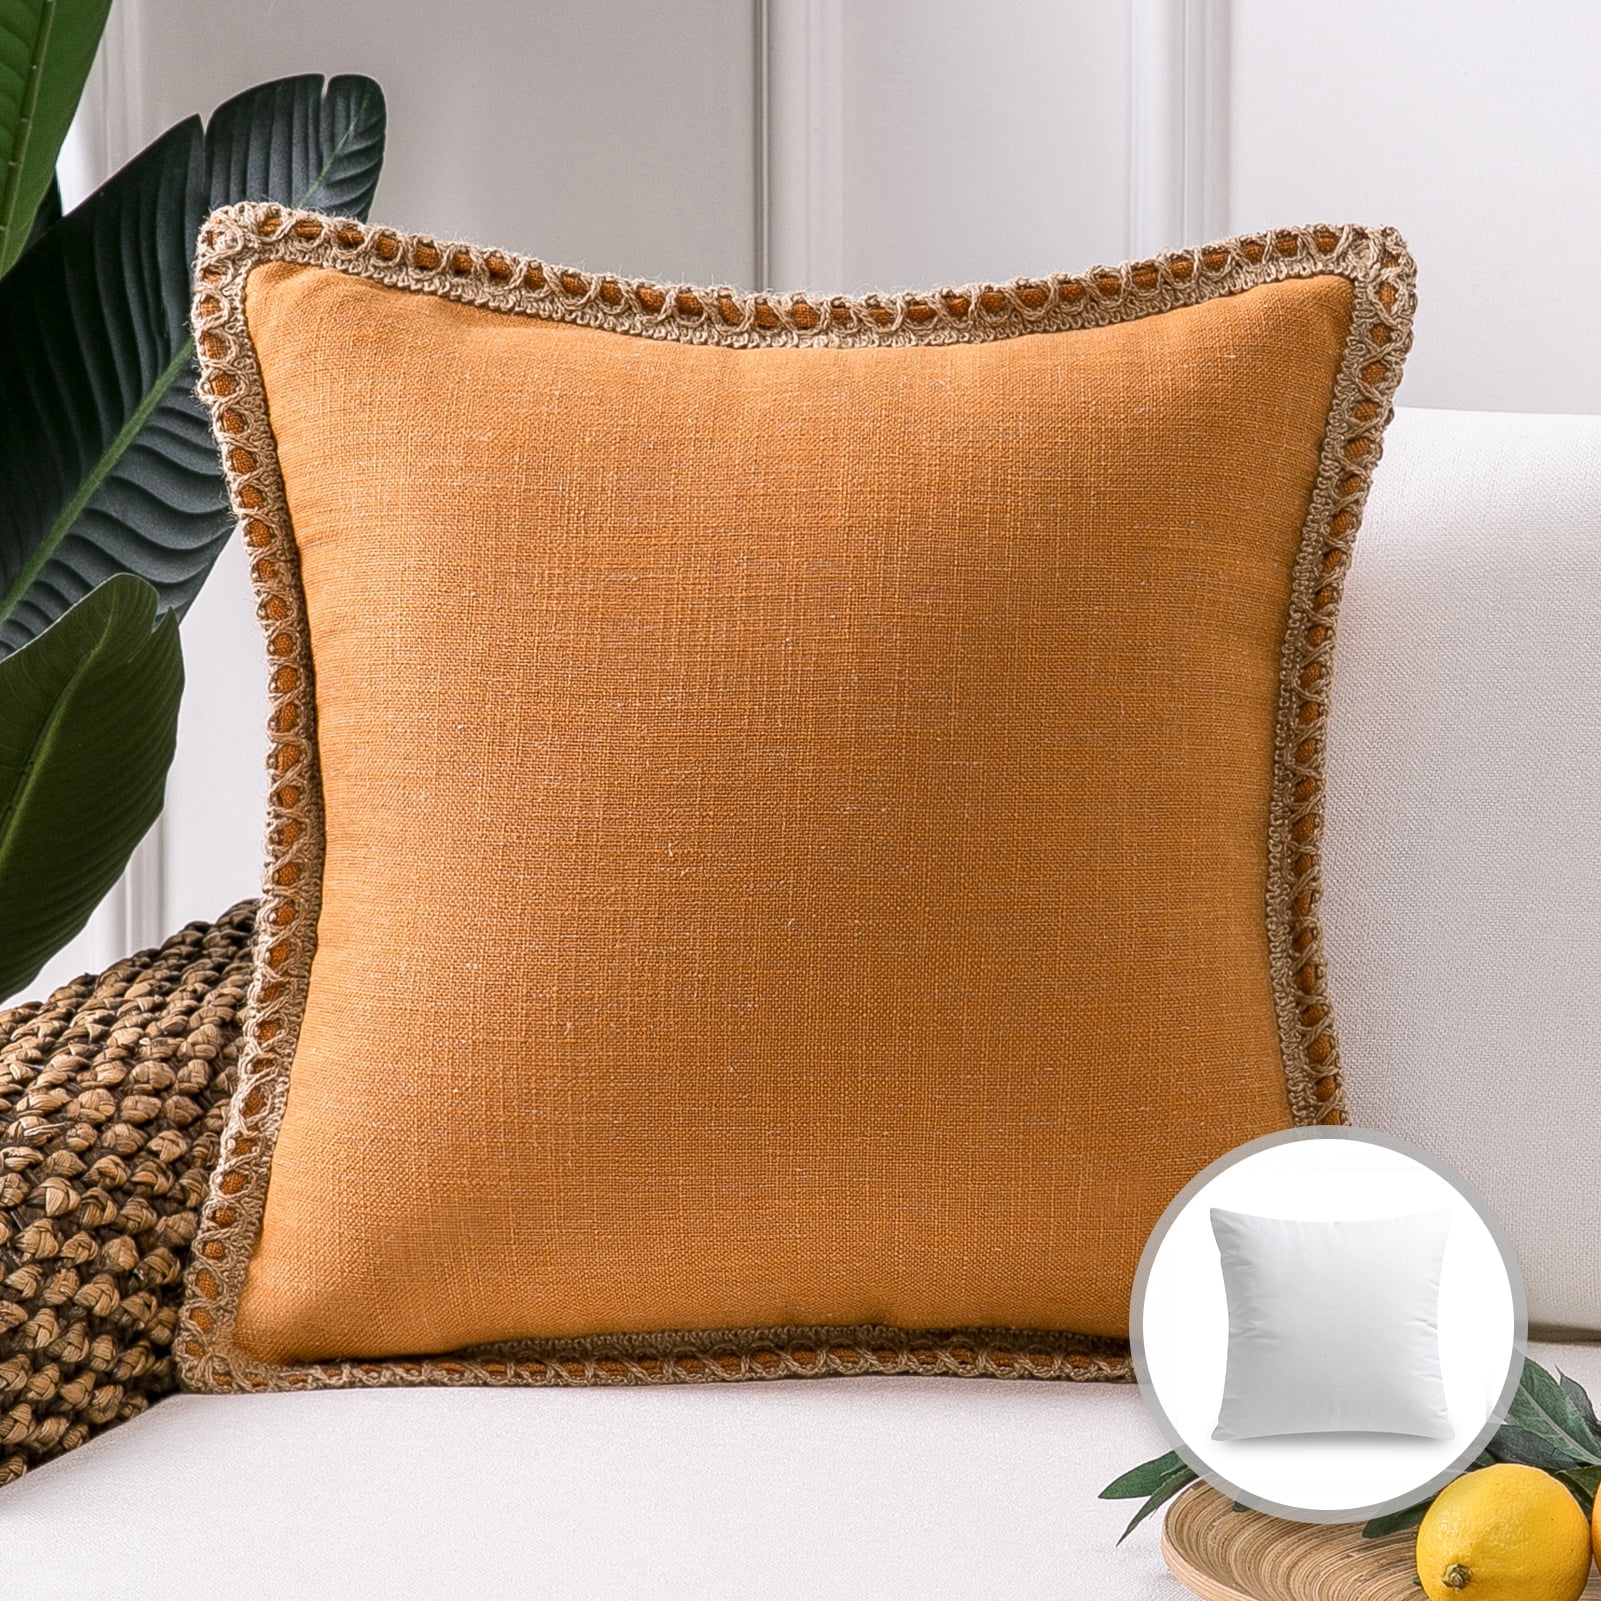 Phantoscope Pack of 2 Farmhouse Decorative Throw Pillow Covers For Home  solid Burlap Linen Trimmed Tailored Edges Off White 18 x 18 inches, 45 x 45  cm